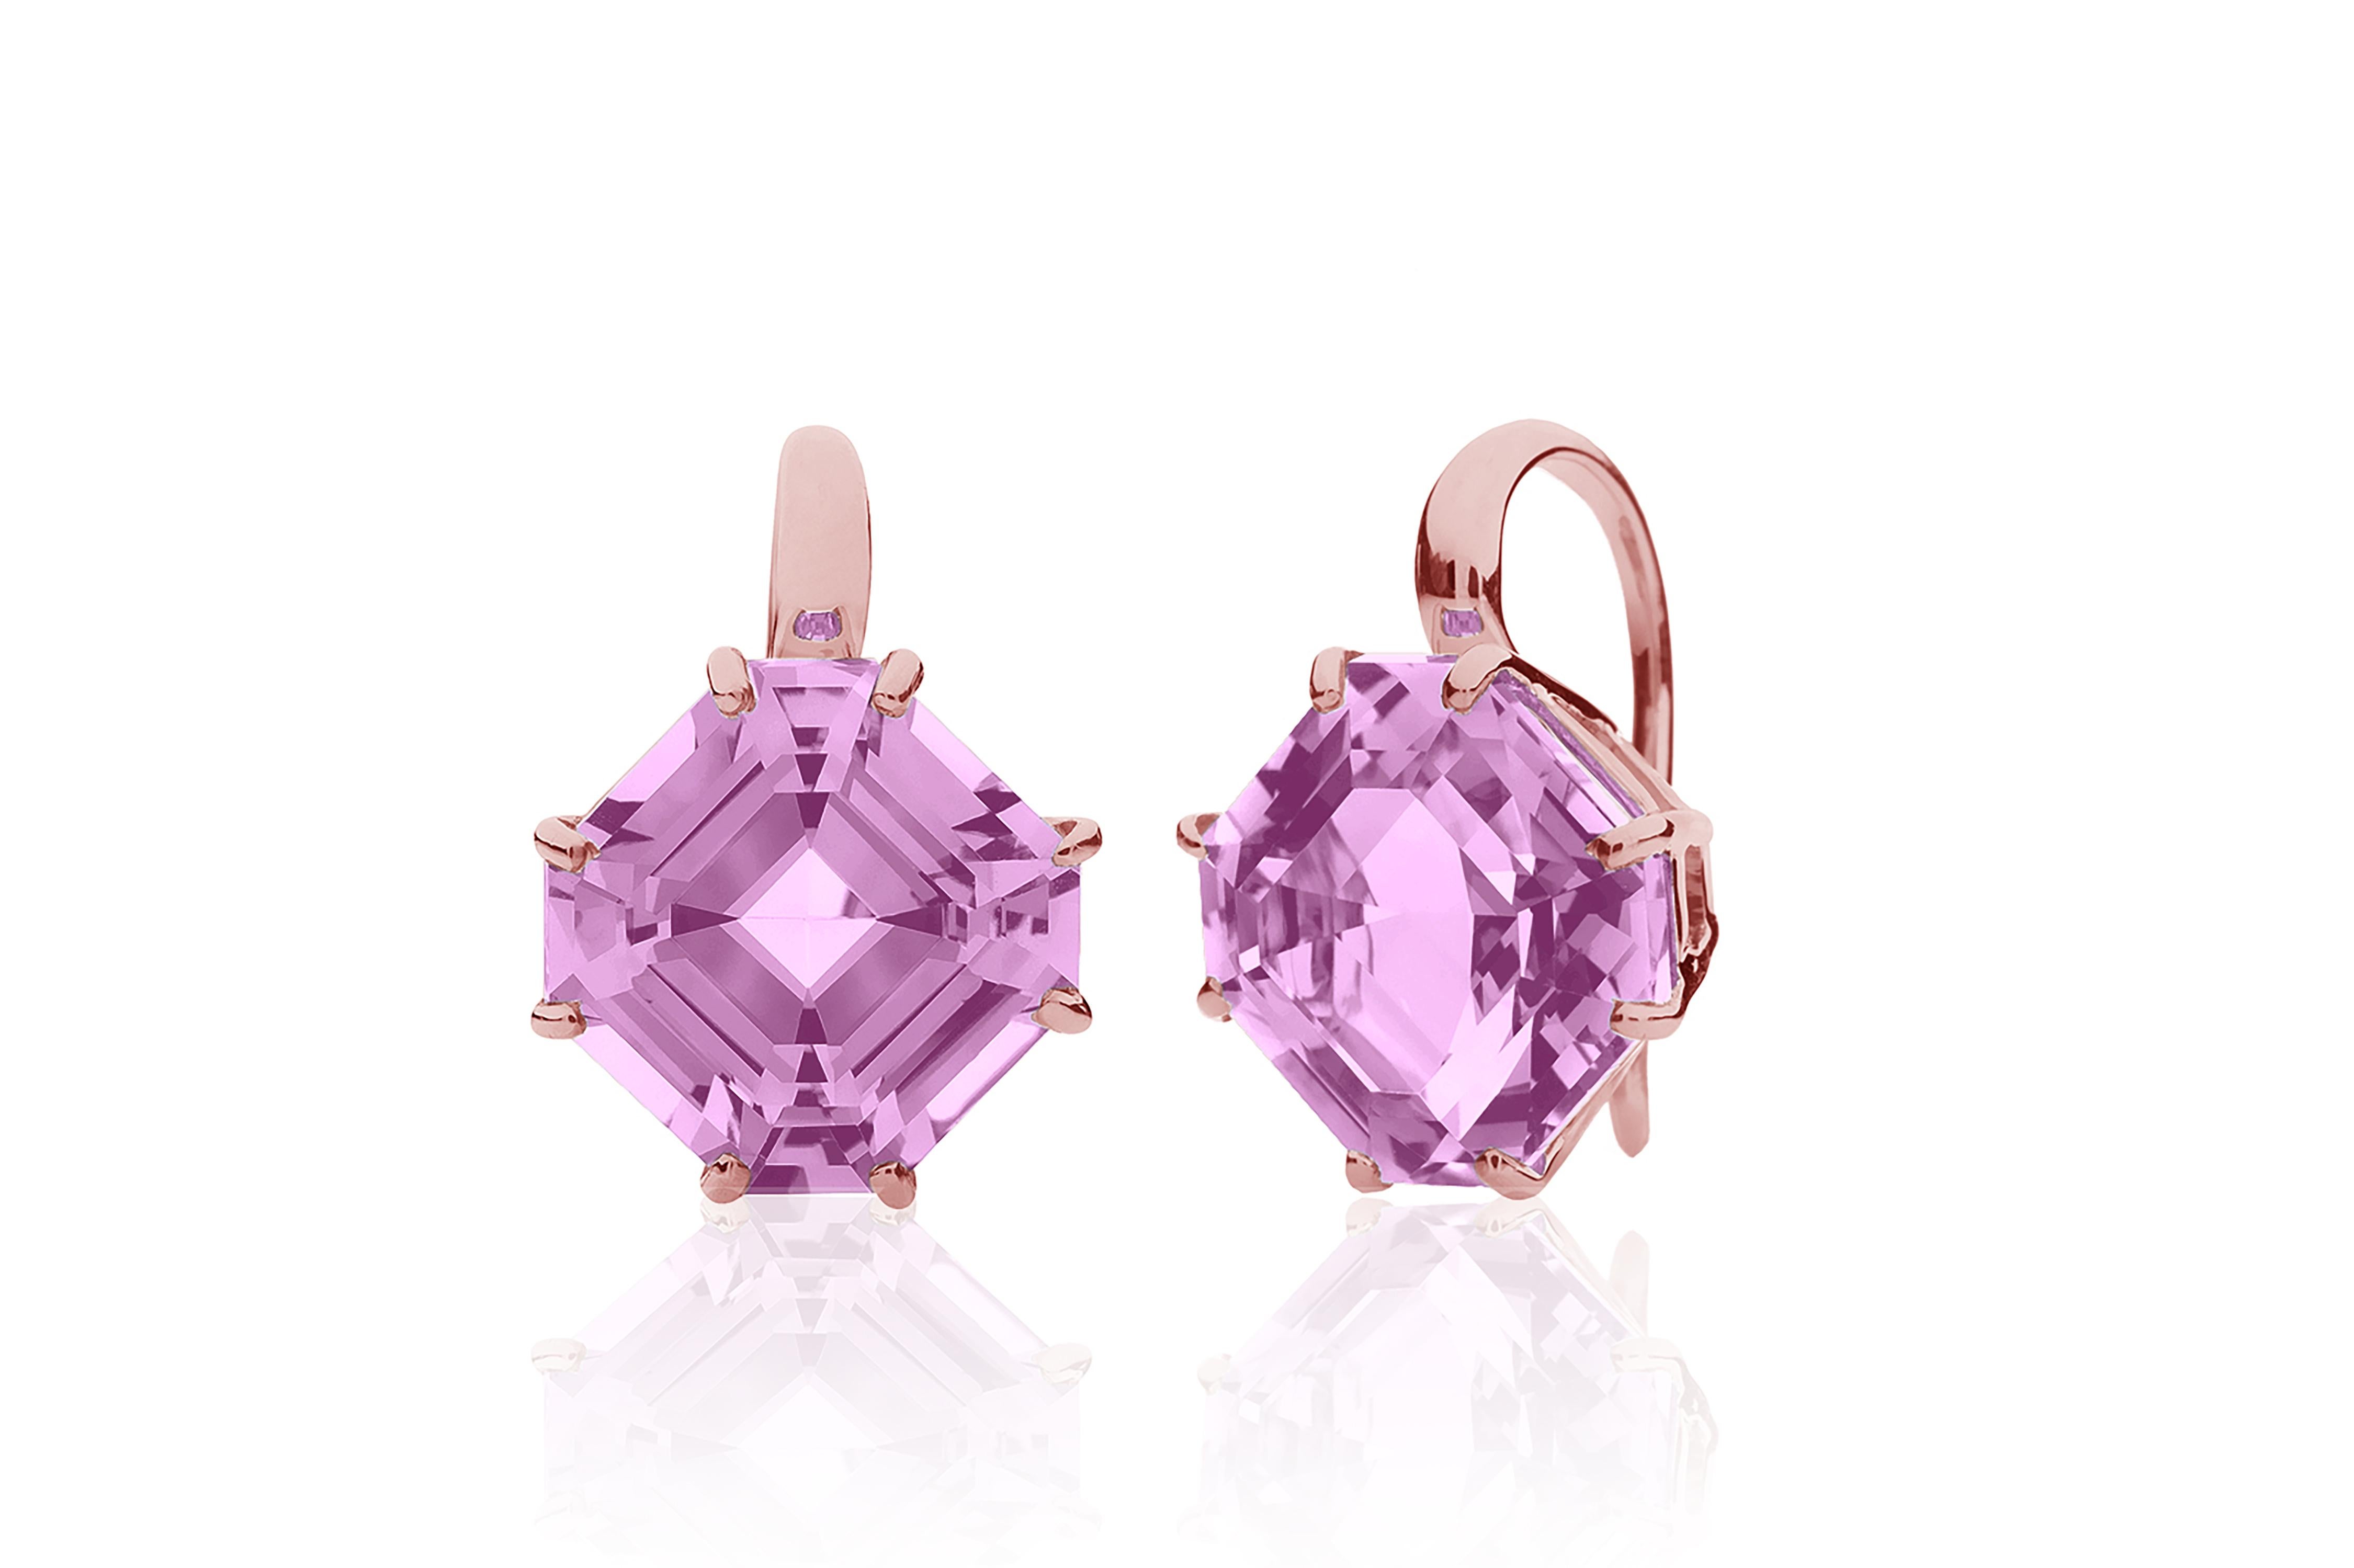 Lavender Amethyst Square Emerald Cut Earrings from the exquisite 'Gossip' Collection in 18K Rose Gold. These elegant earrings showcase the timeless beauty of lavender amethyst stones with a striking square emerald cut, exuding an air of